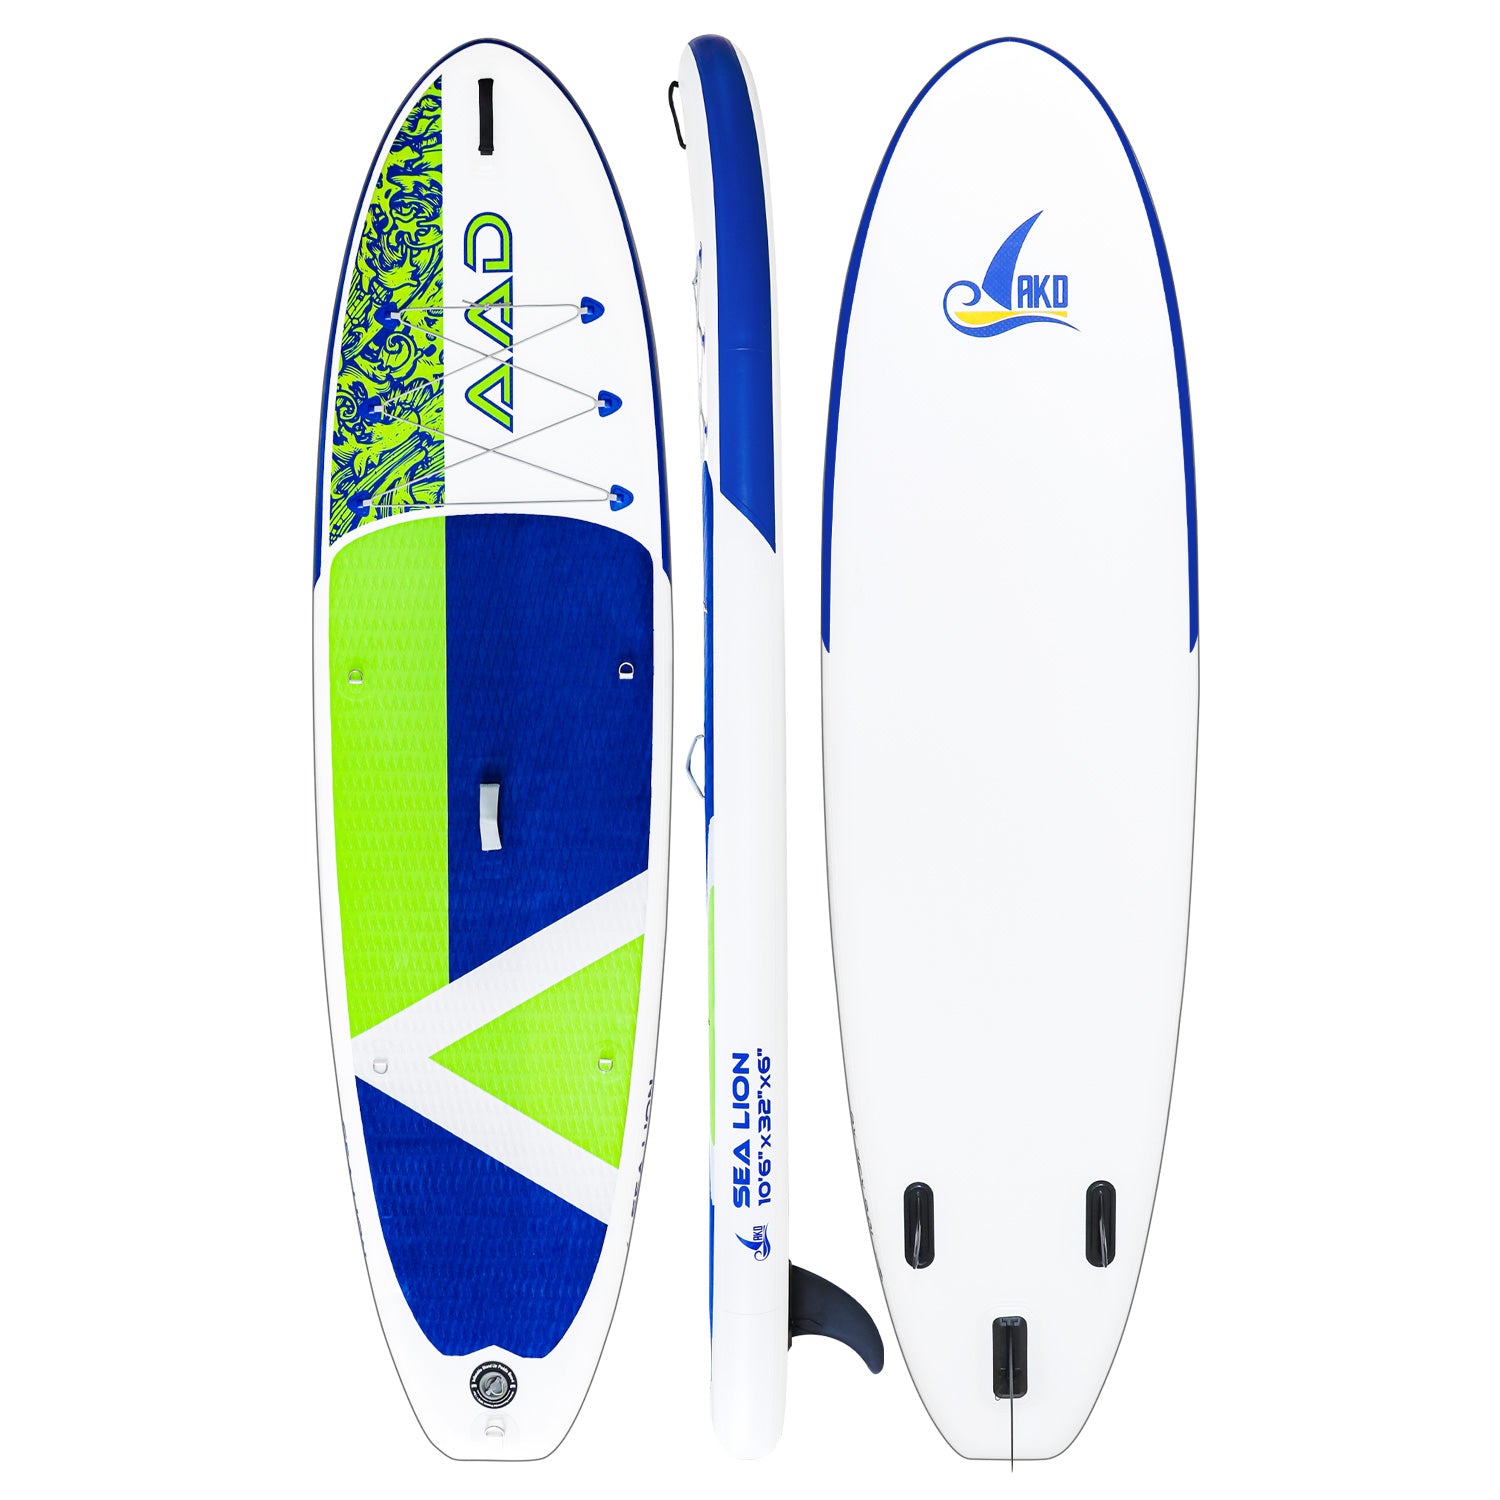 AKD SeaLion 10'6 " Stand Up Paddle Board SUP 320x81x15cm 150kg / 318L (Vert)